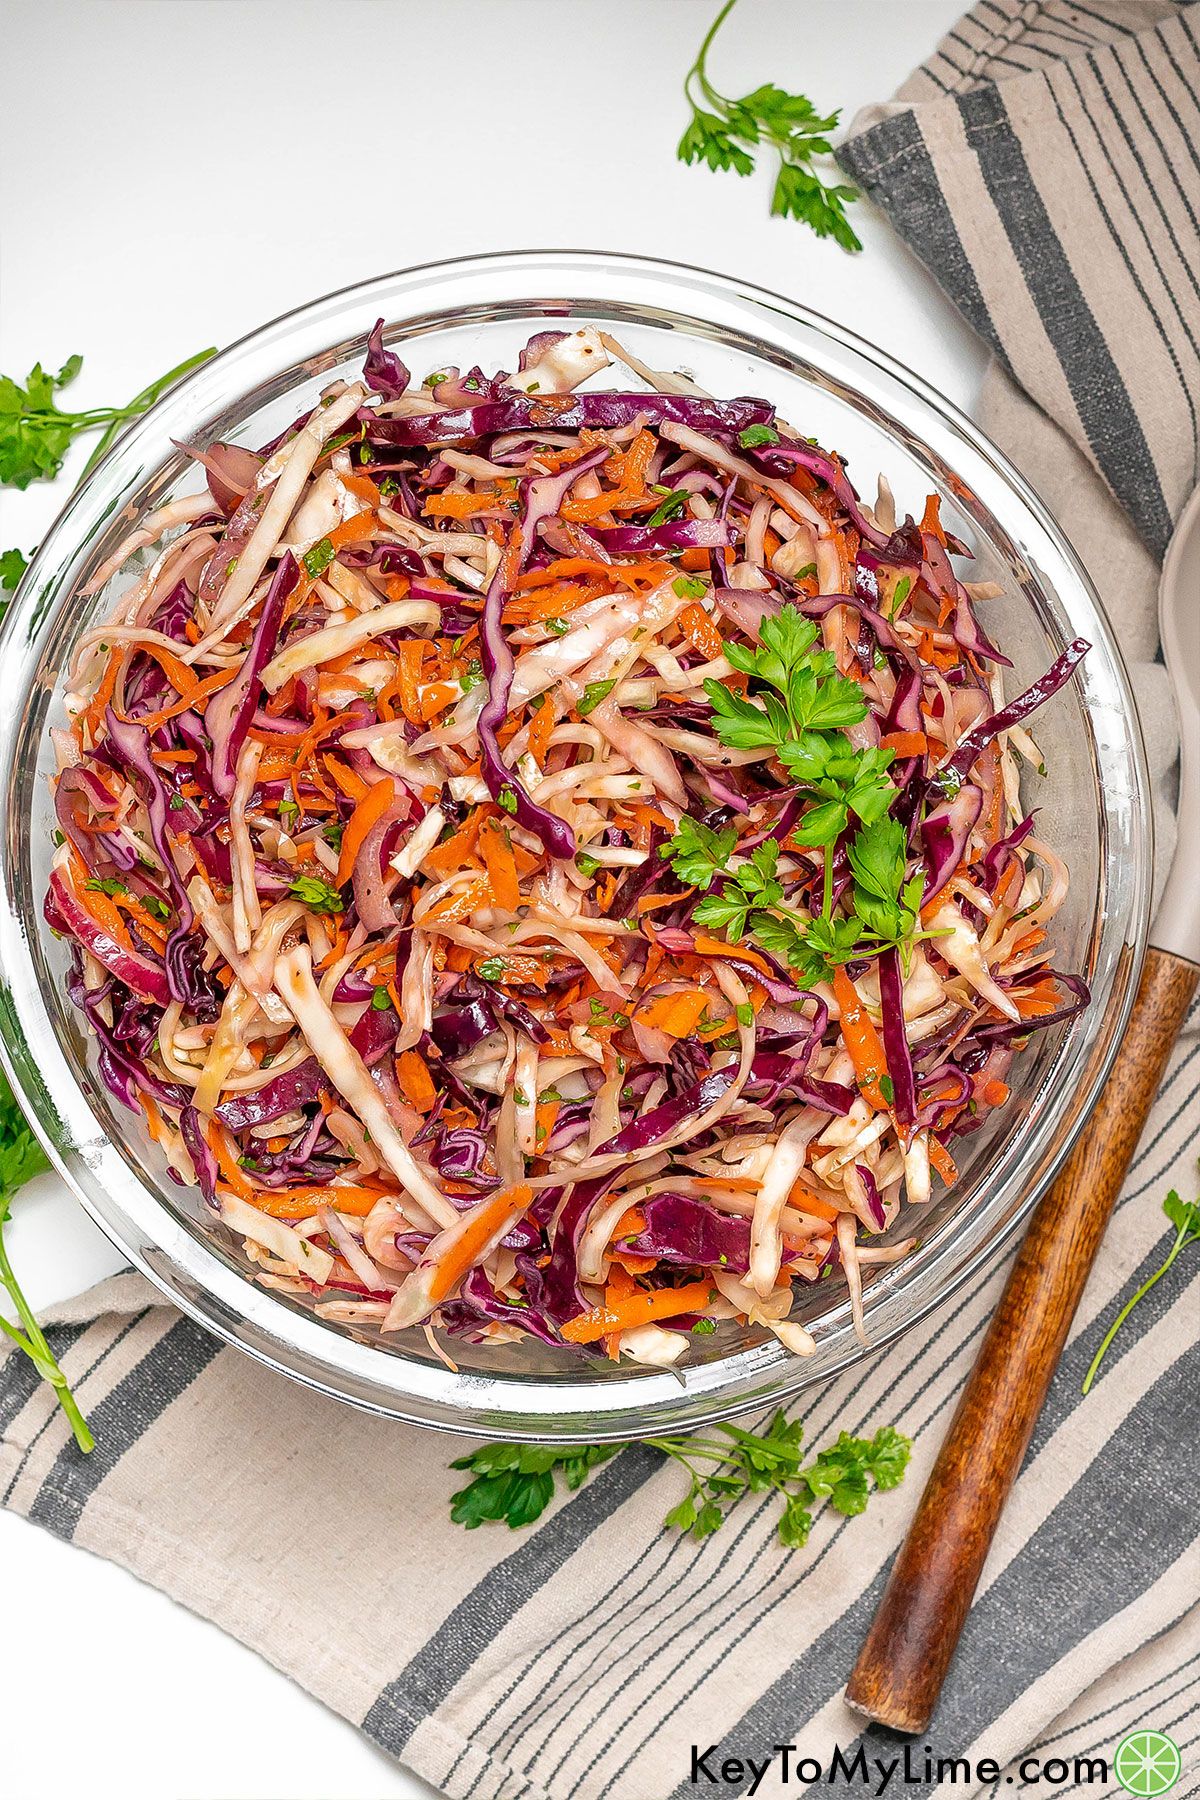 A freshly made vinegar coleslaw garnished with parsley in a large glass bowl.